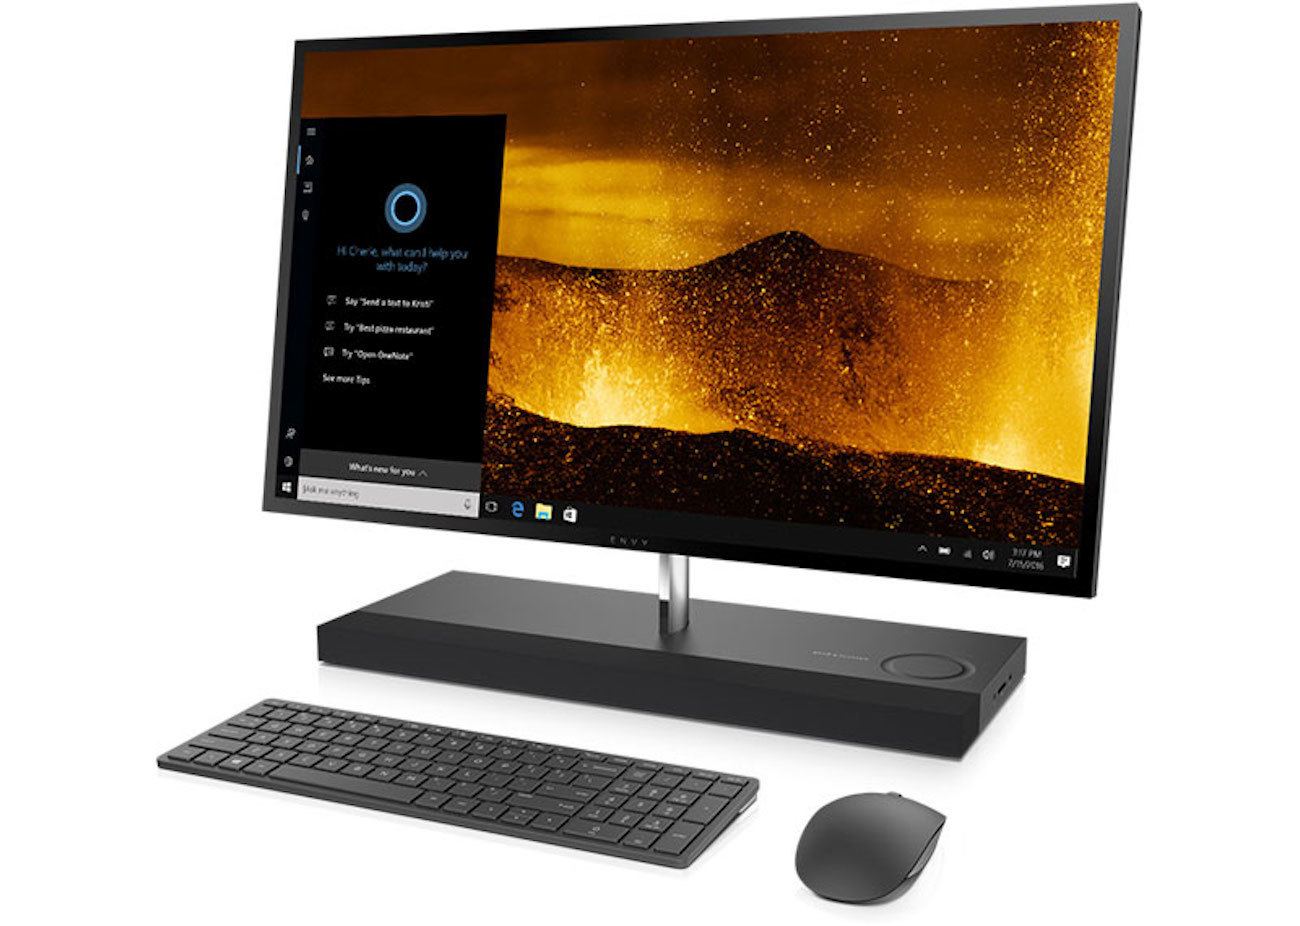 HP Envy All-in-One Computer System